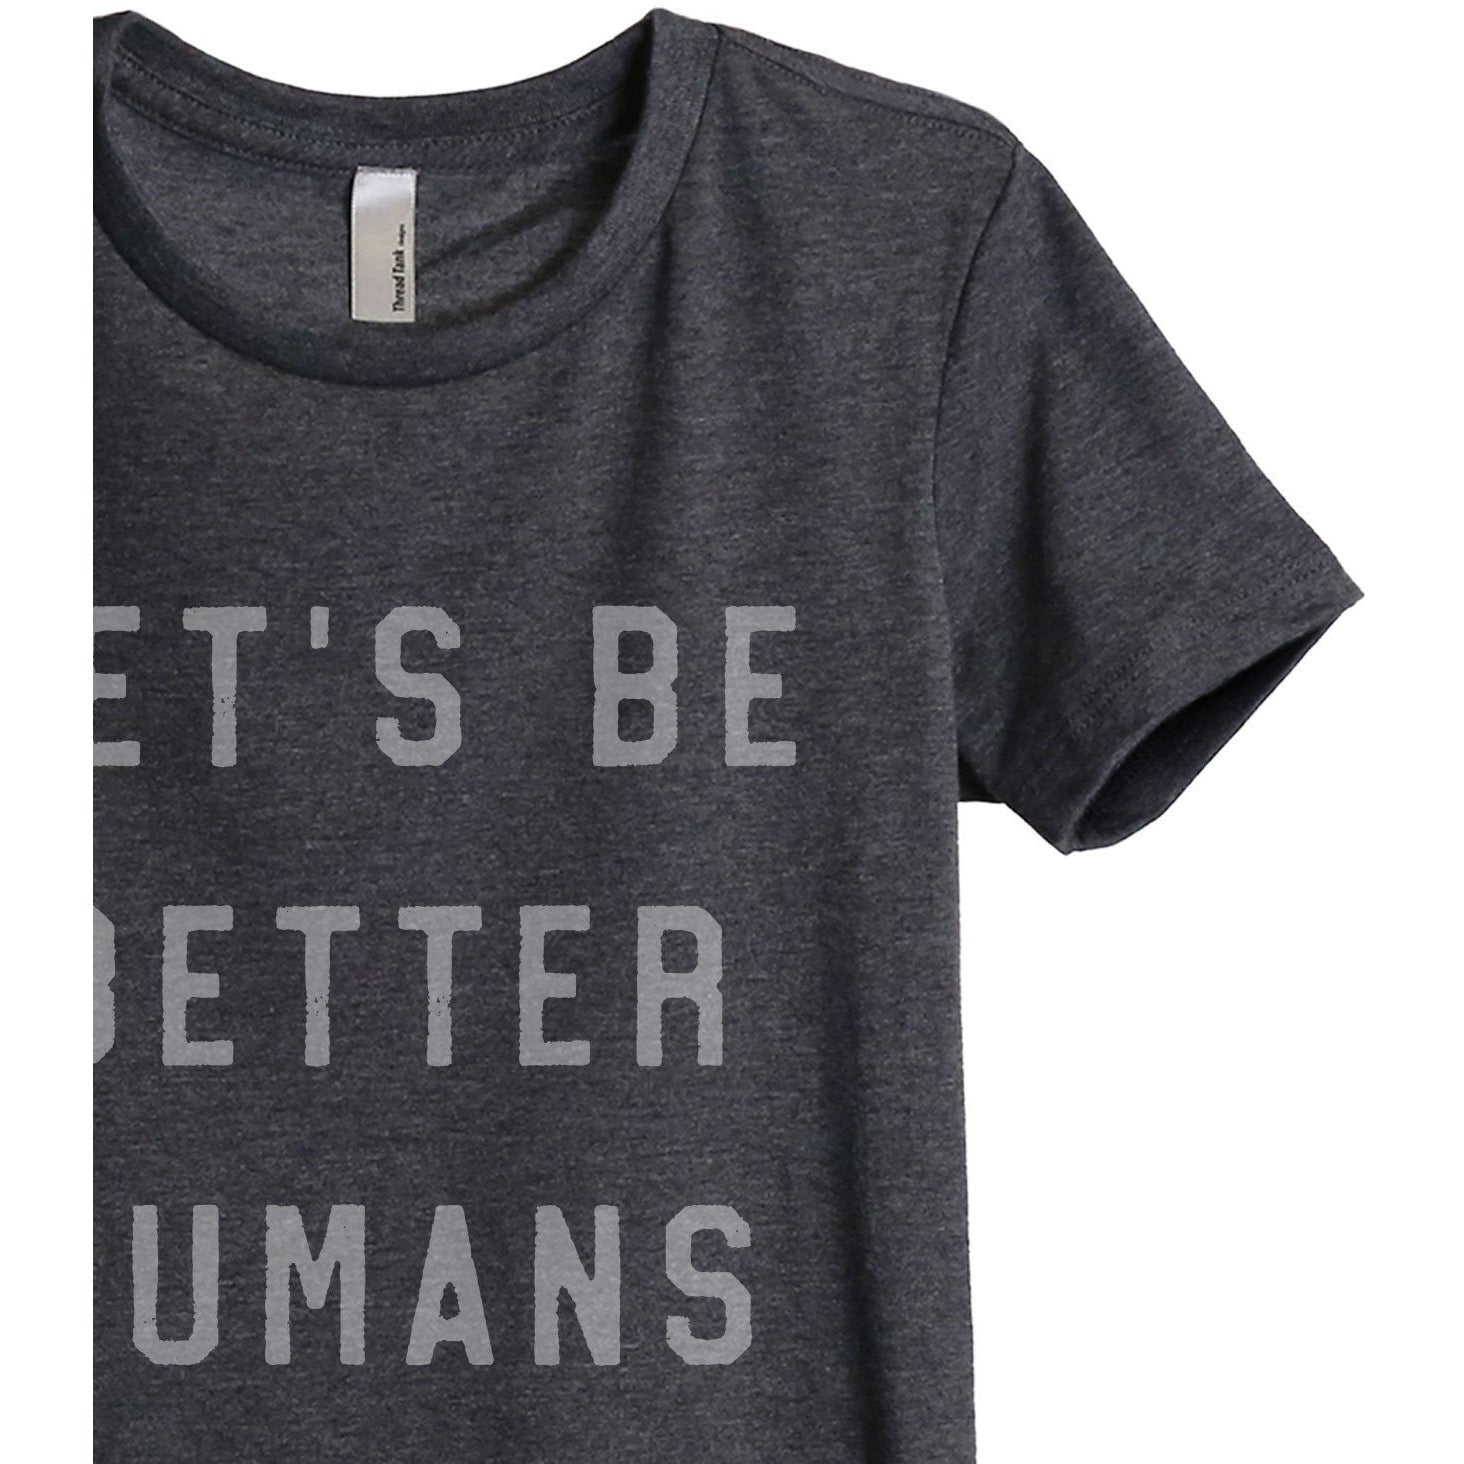 Let's Be Better Humans